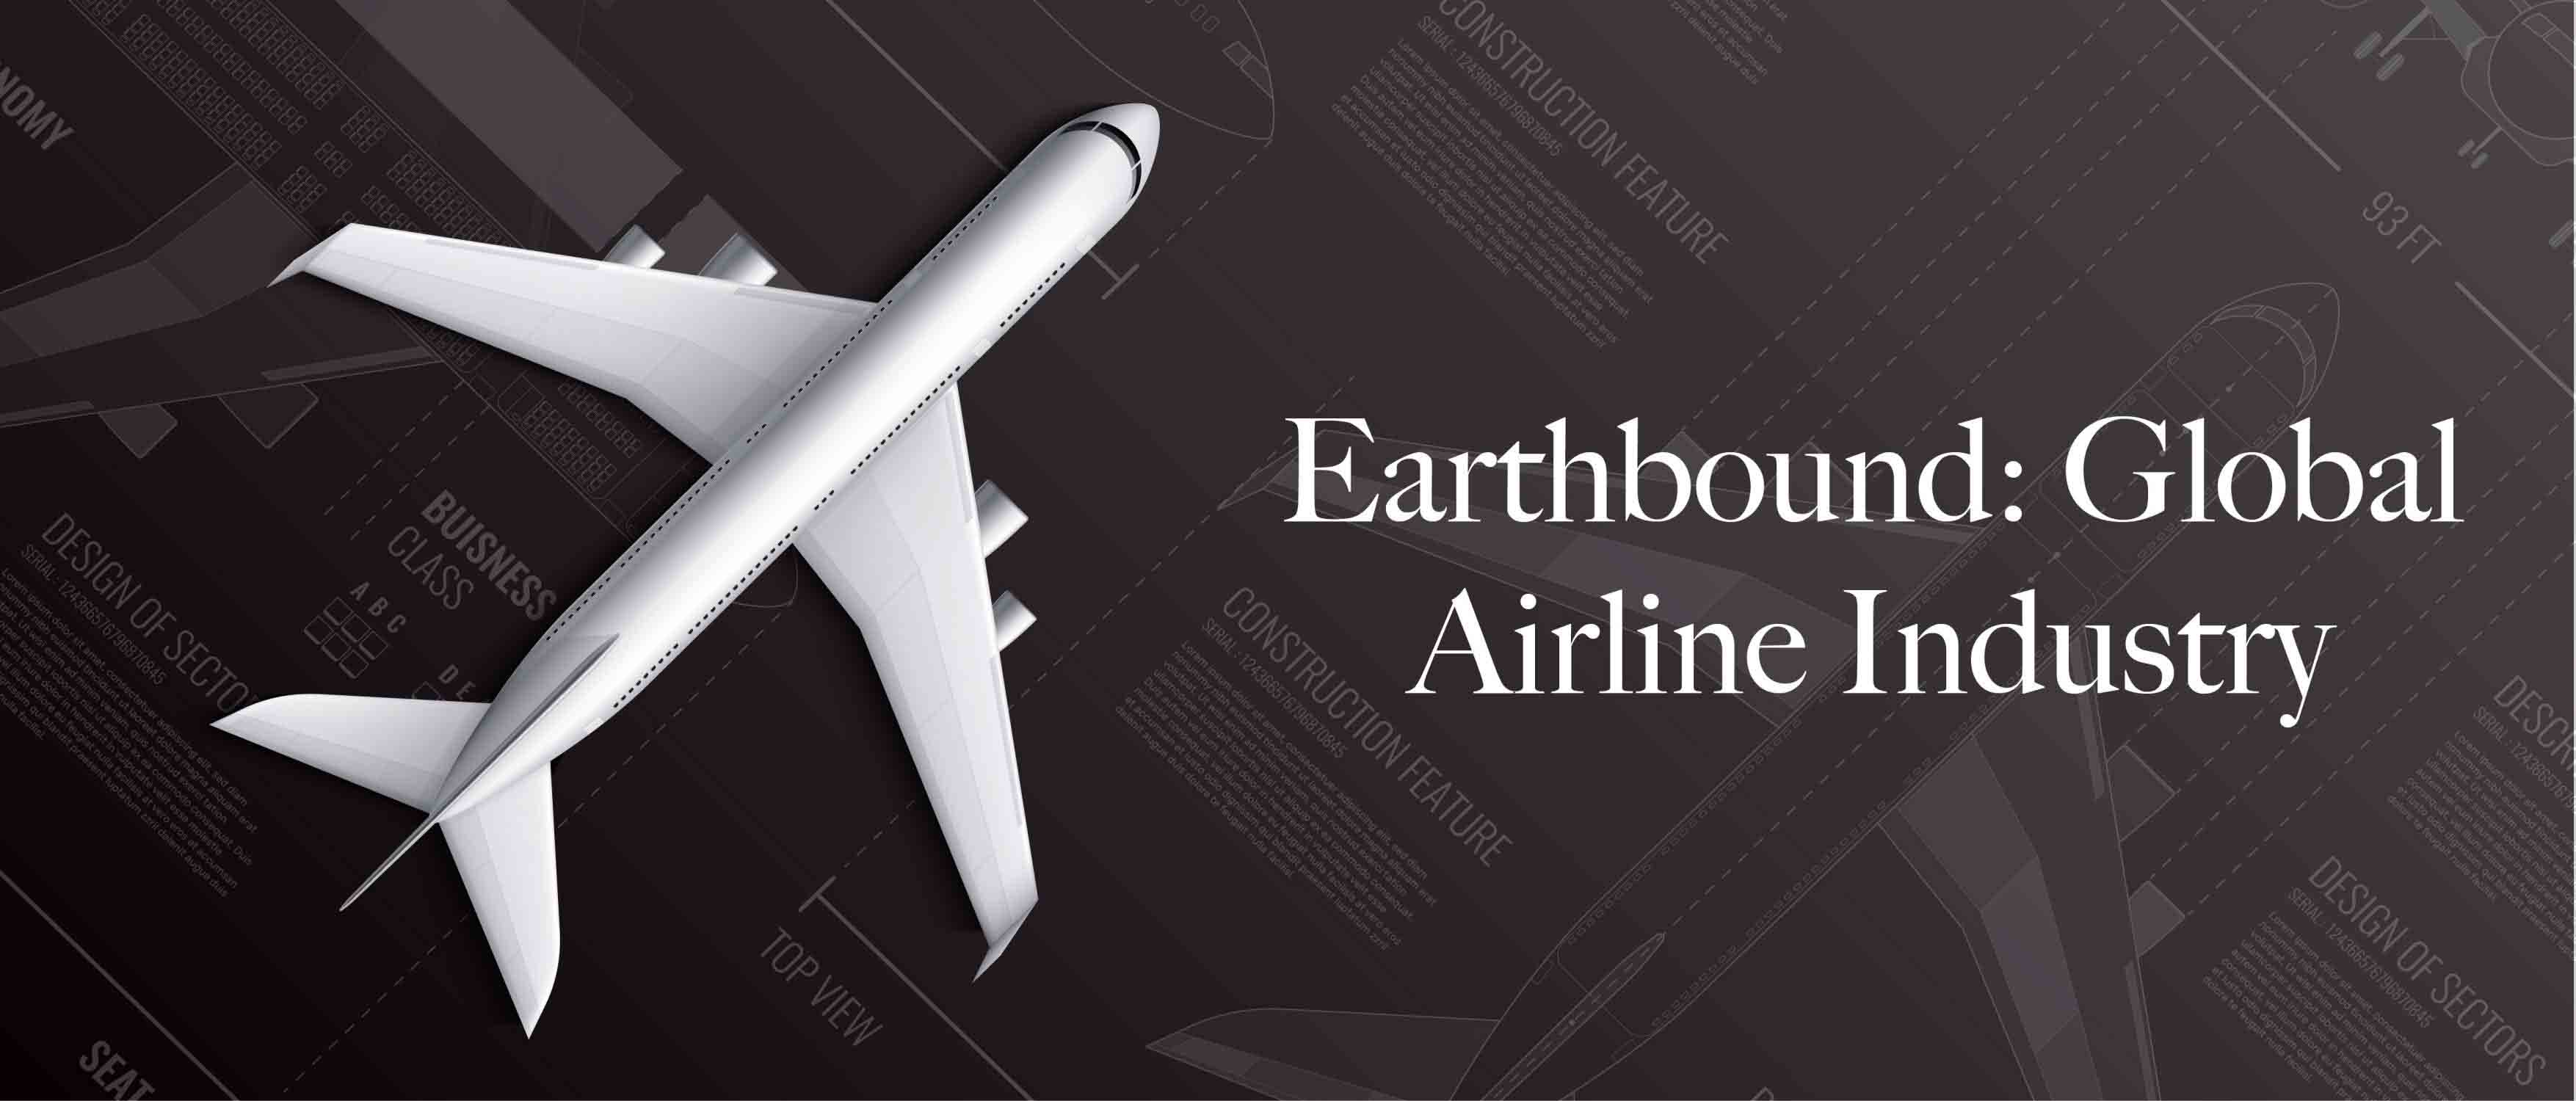  Earthbound: Global Airline Industry